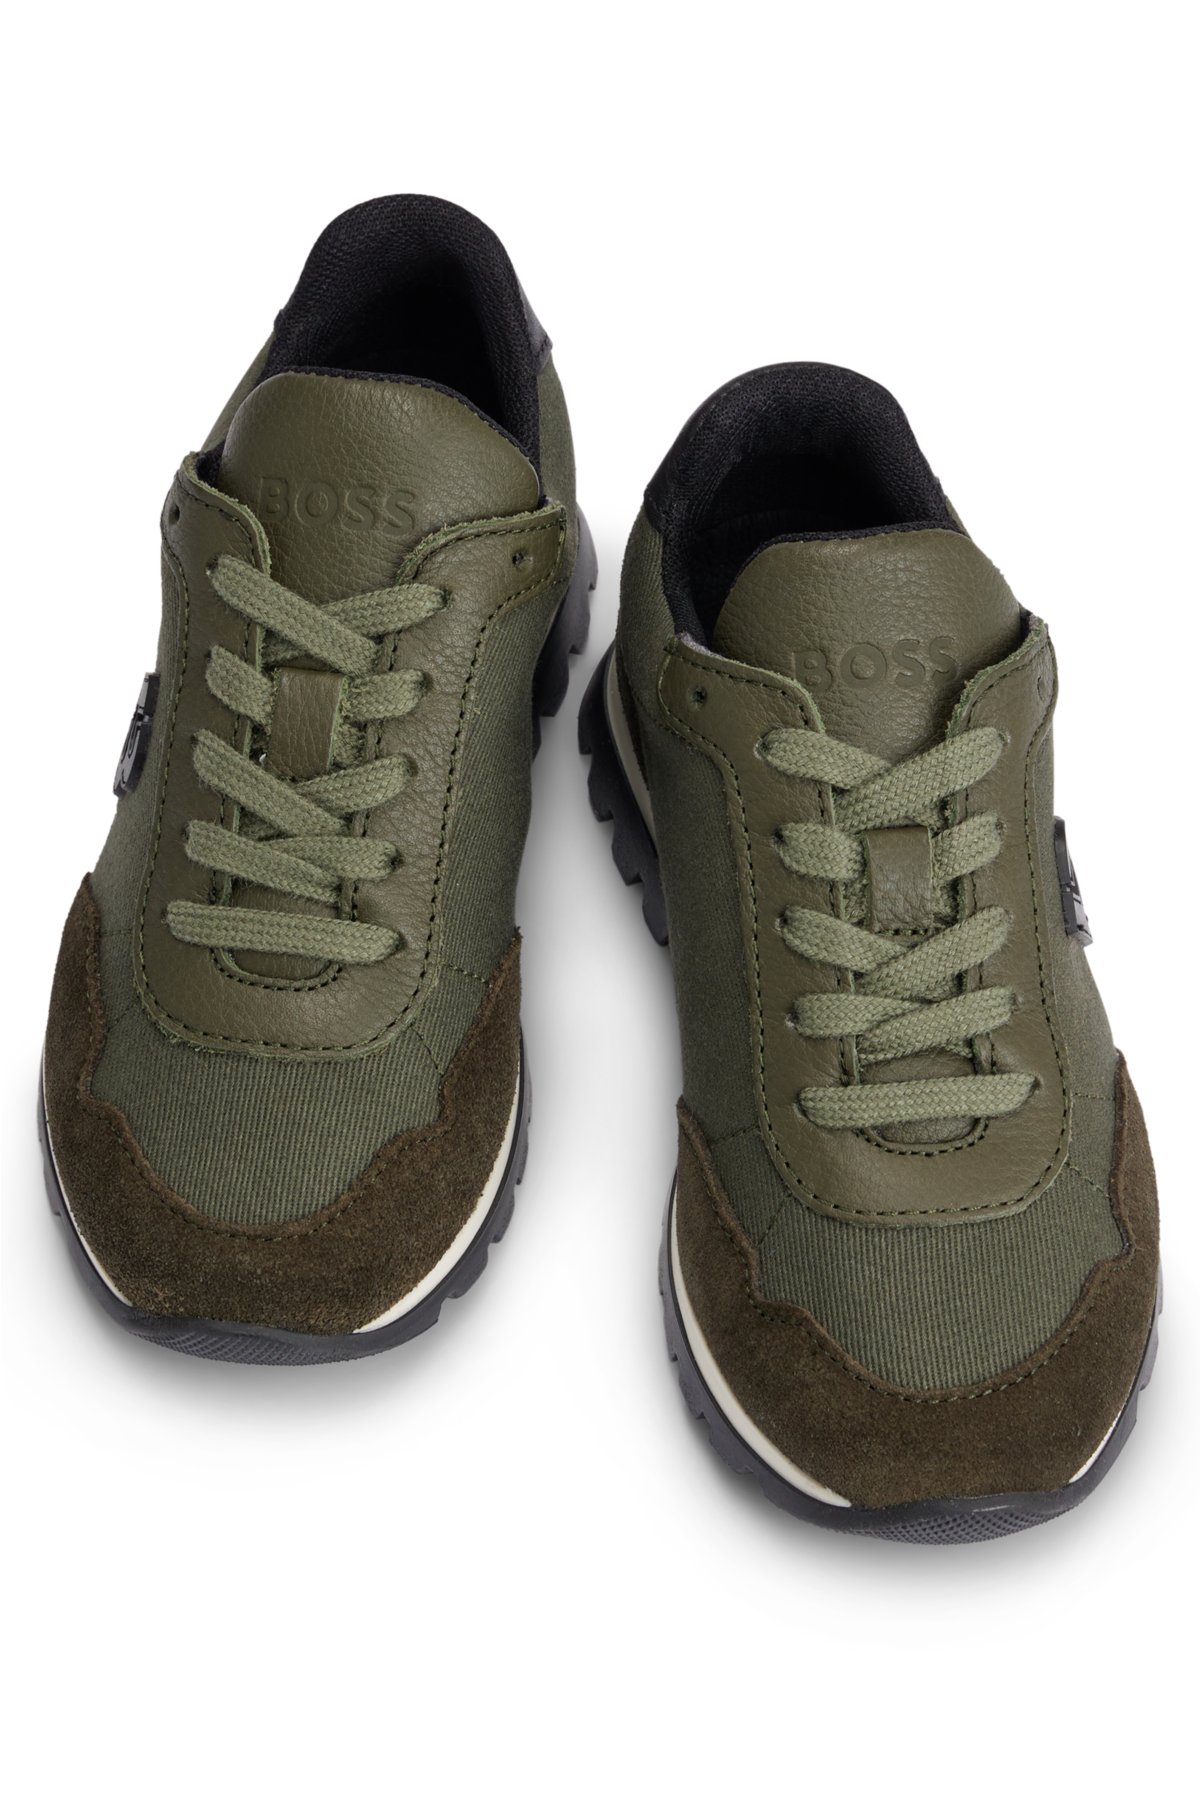 Kids' mixed-material trainers with 'B' detail, Dark Green